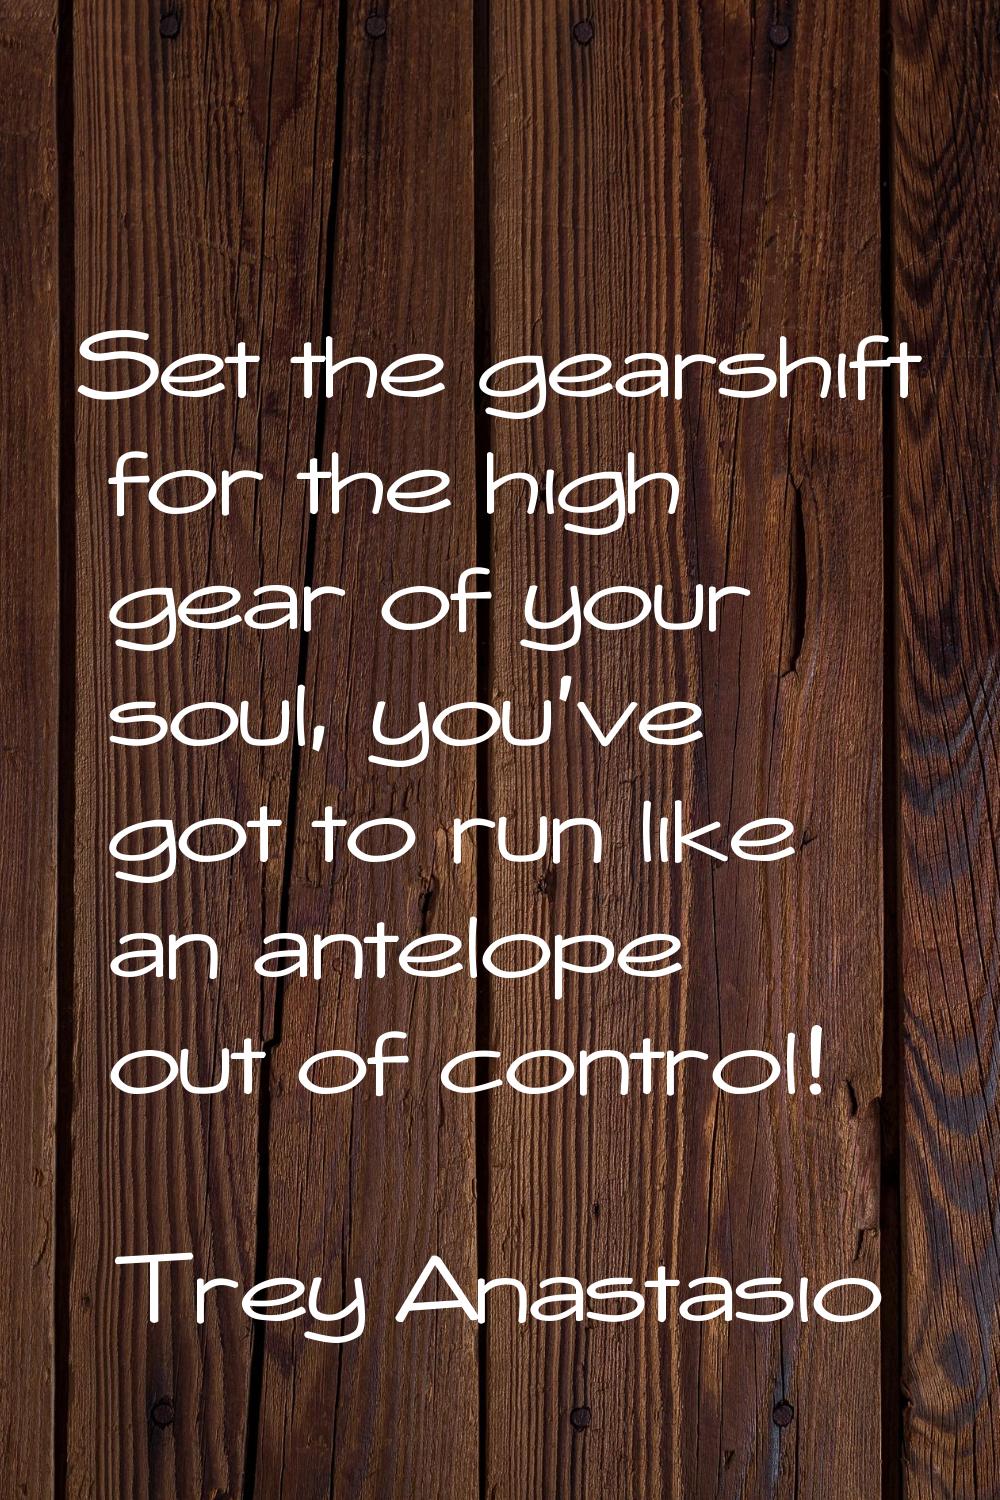 Set the gearshift for the high gear of your soul, you've got to run like an antelope out of control